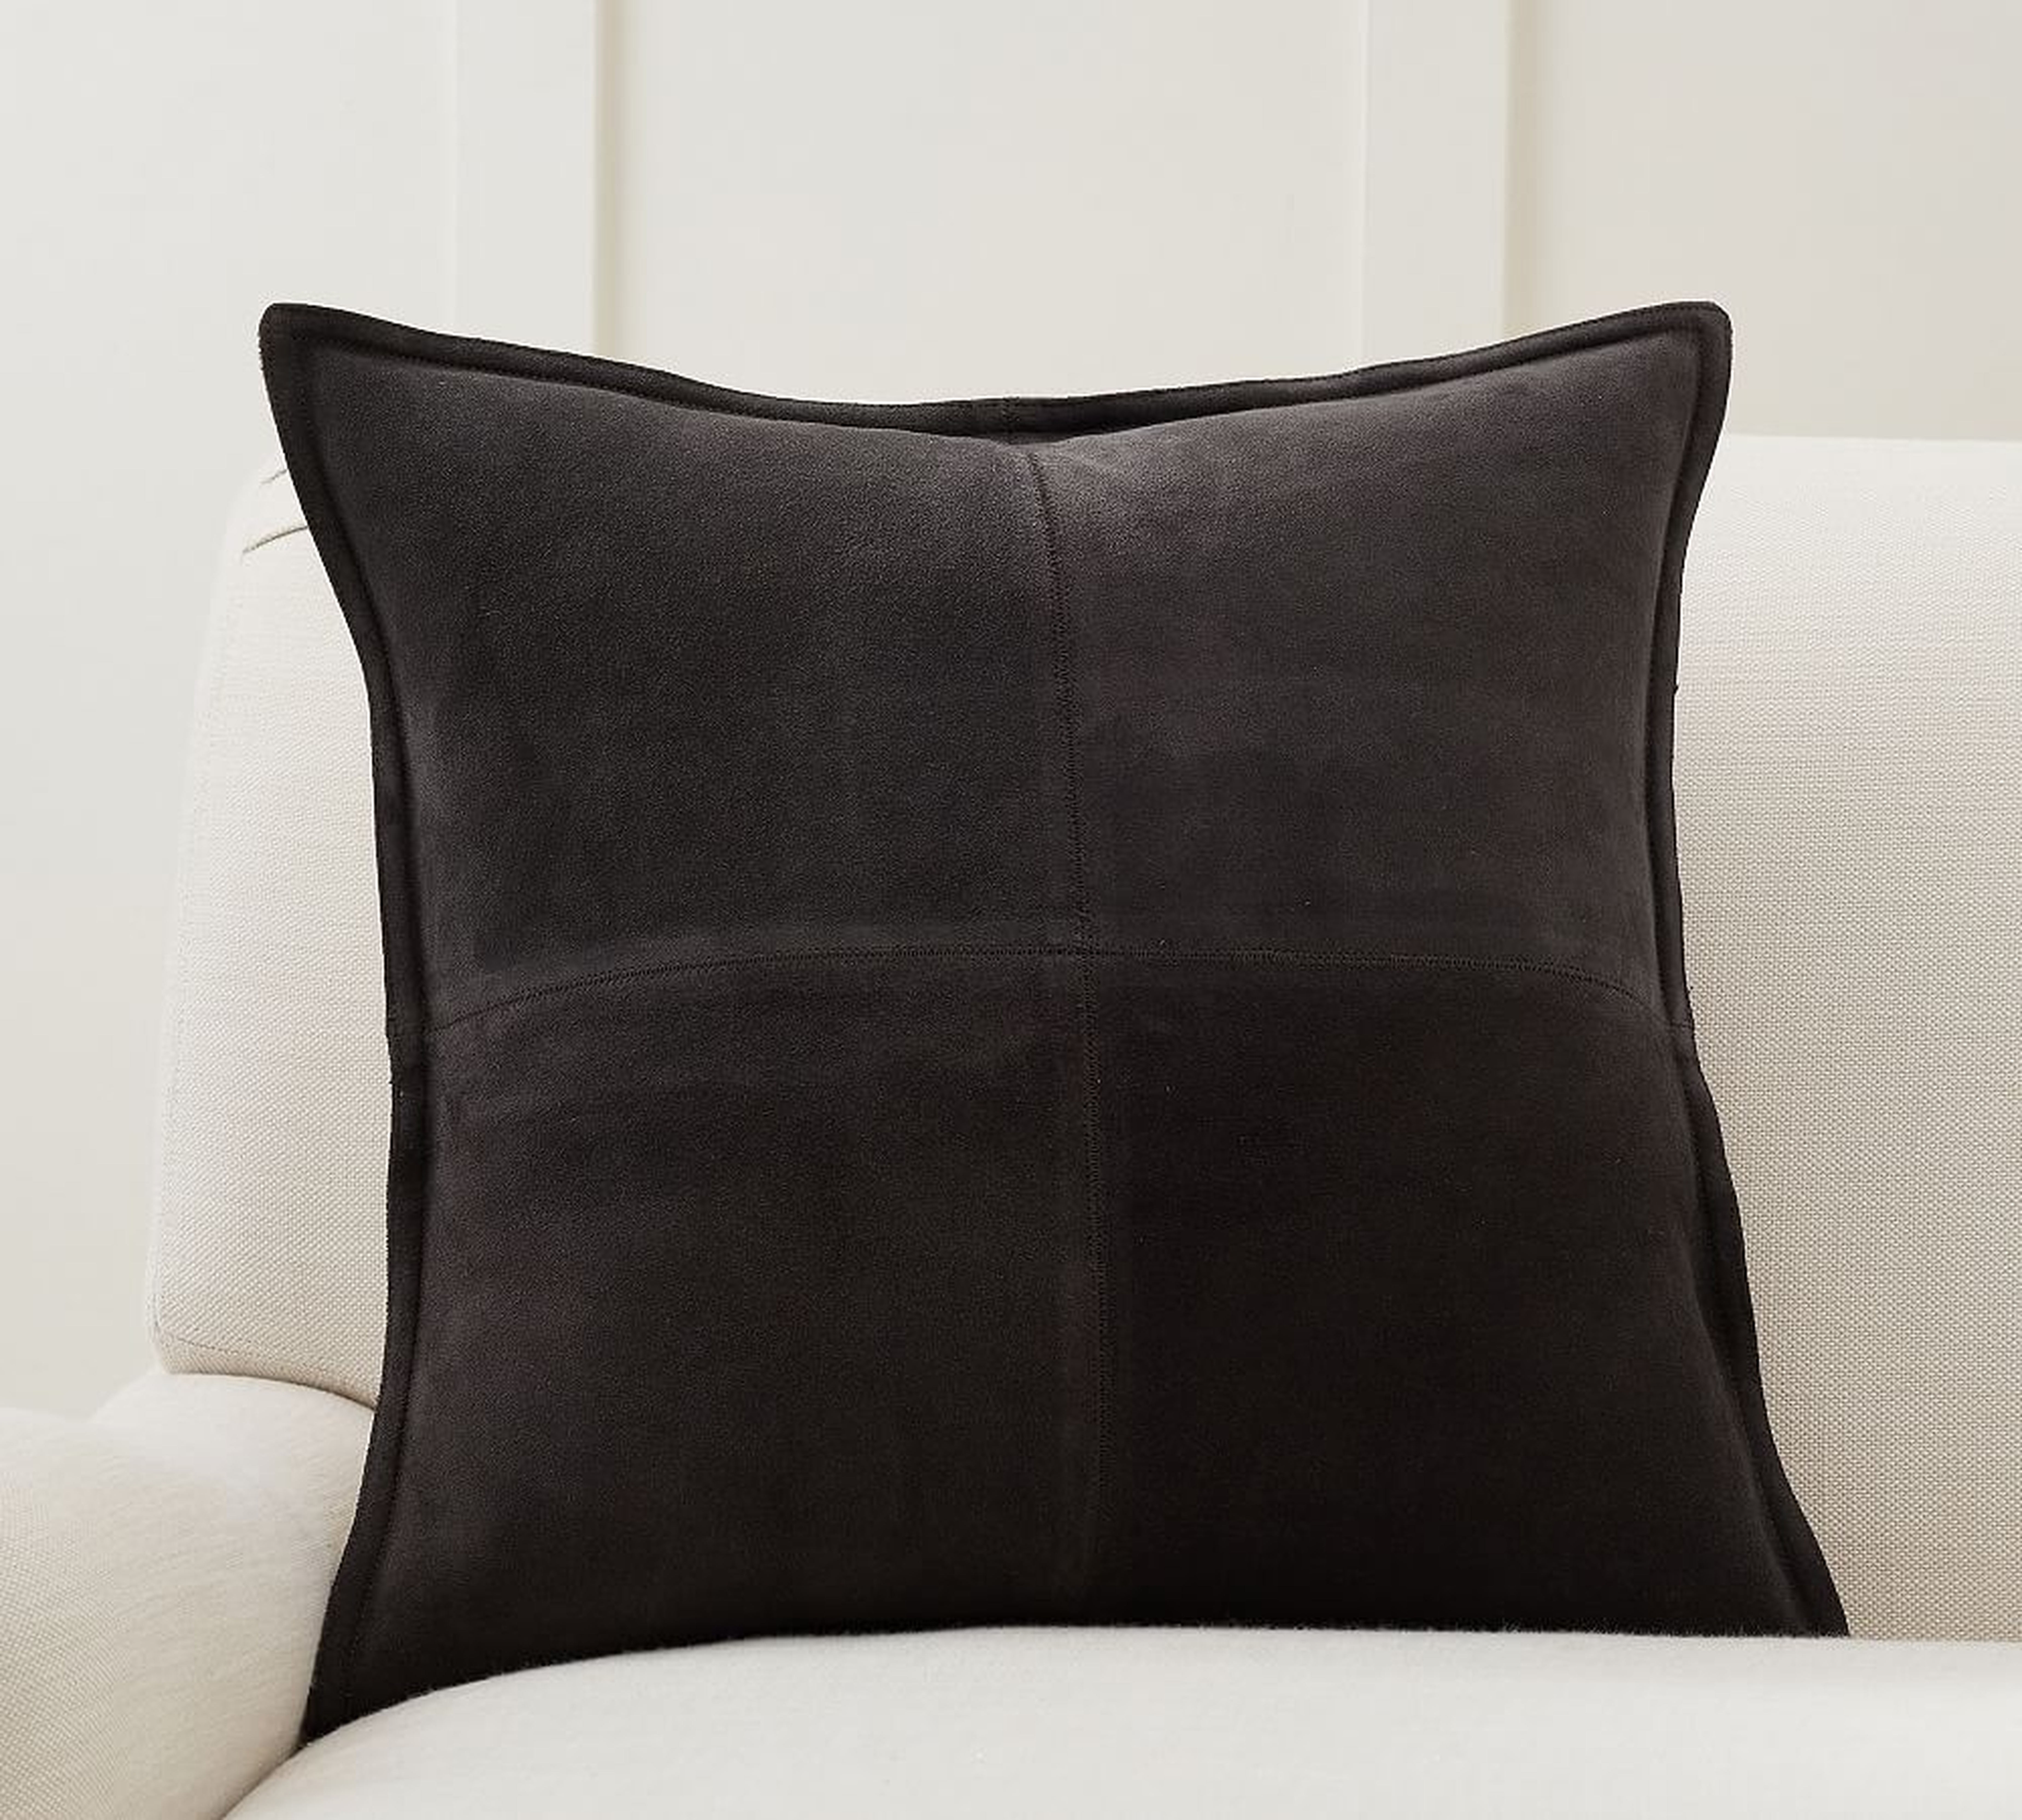 Pieced Suede Pillow Cover, 20", Charcoal - Pottery Barn